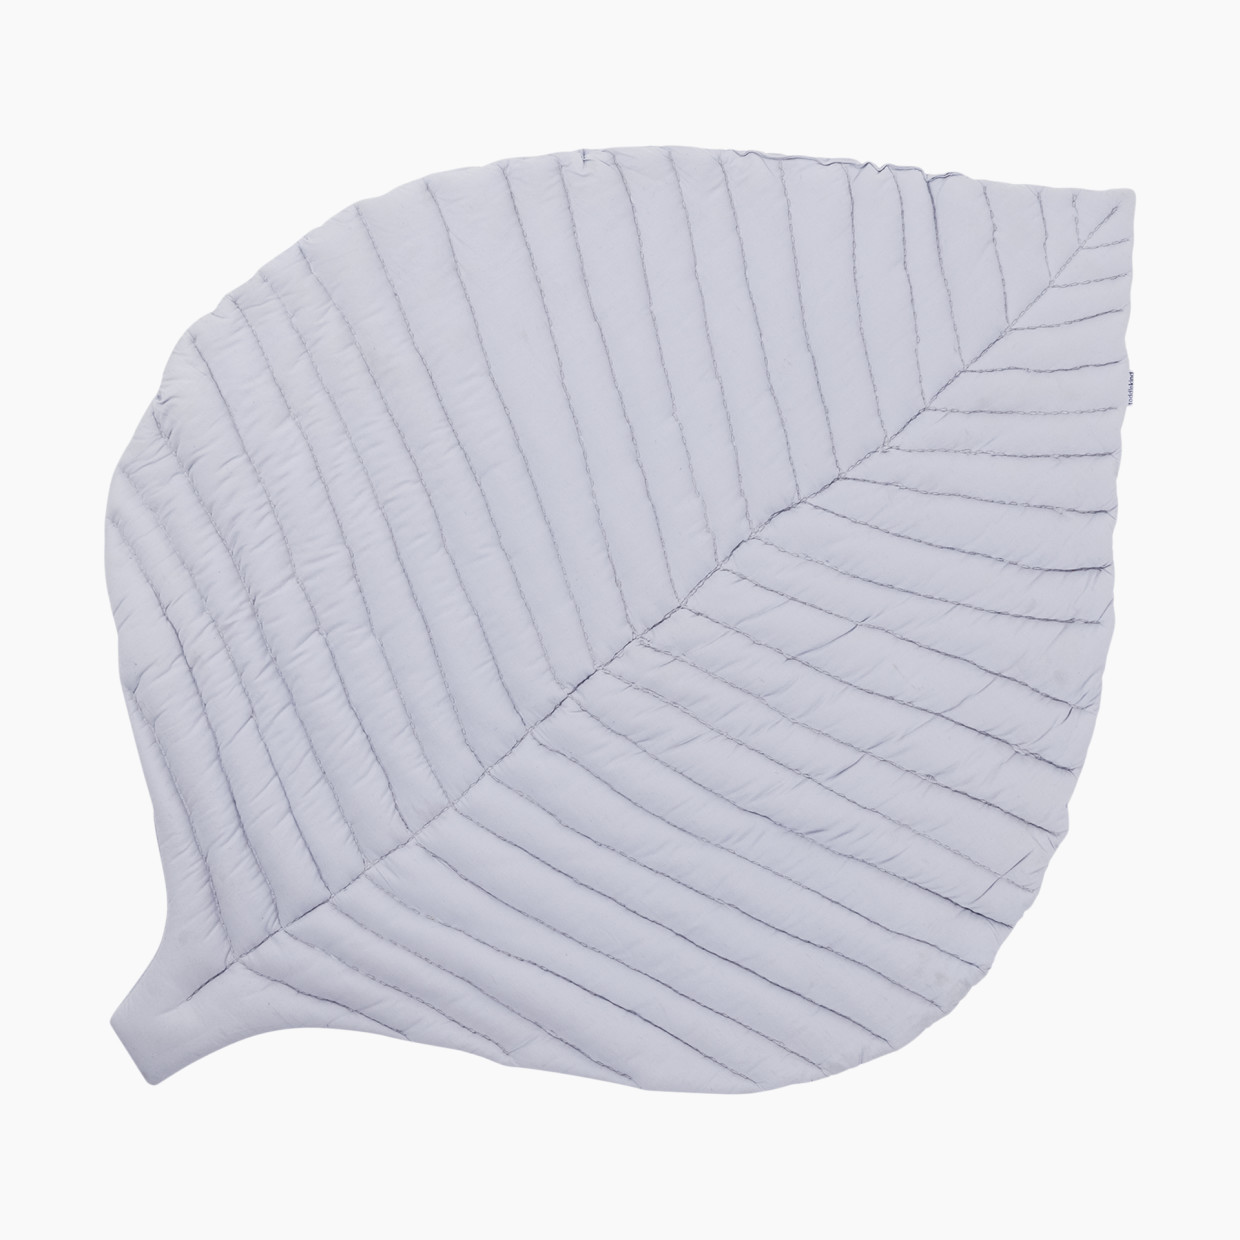 Toddlekind Organic Cotton Quilted Leaf Play Mat - Stone.